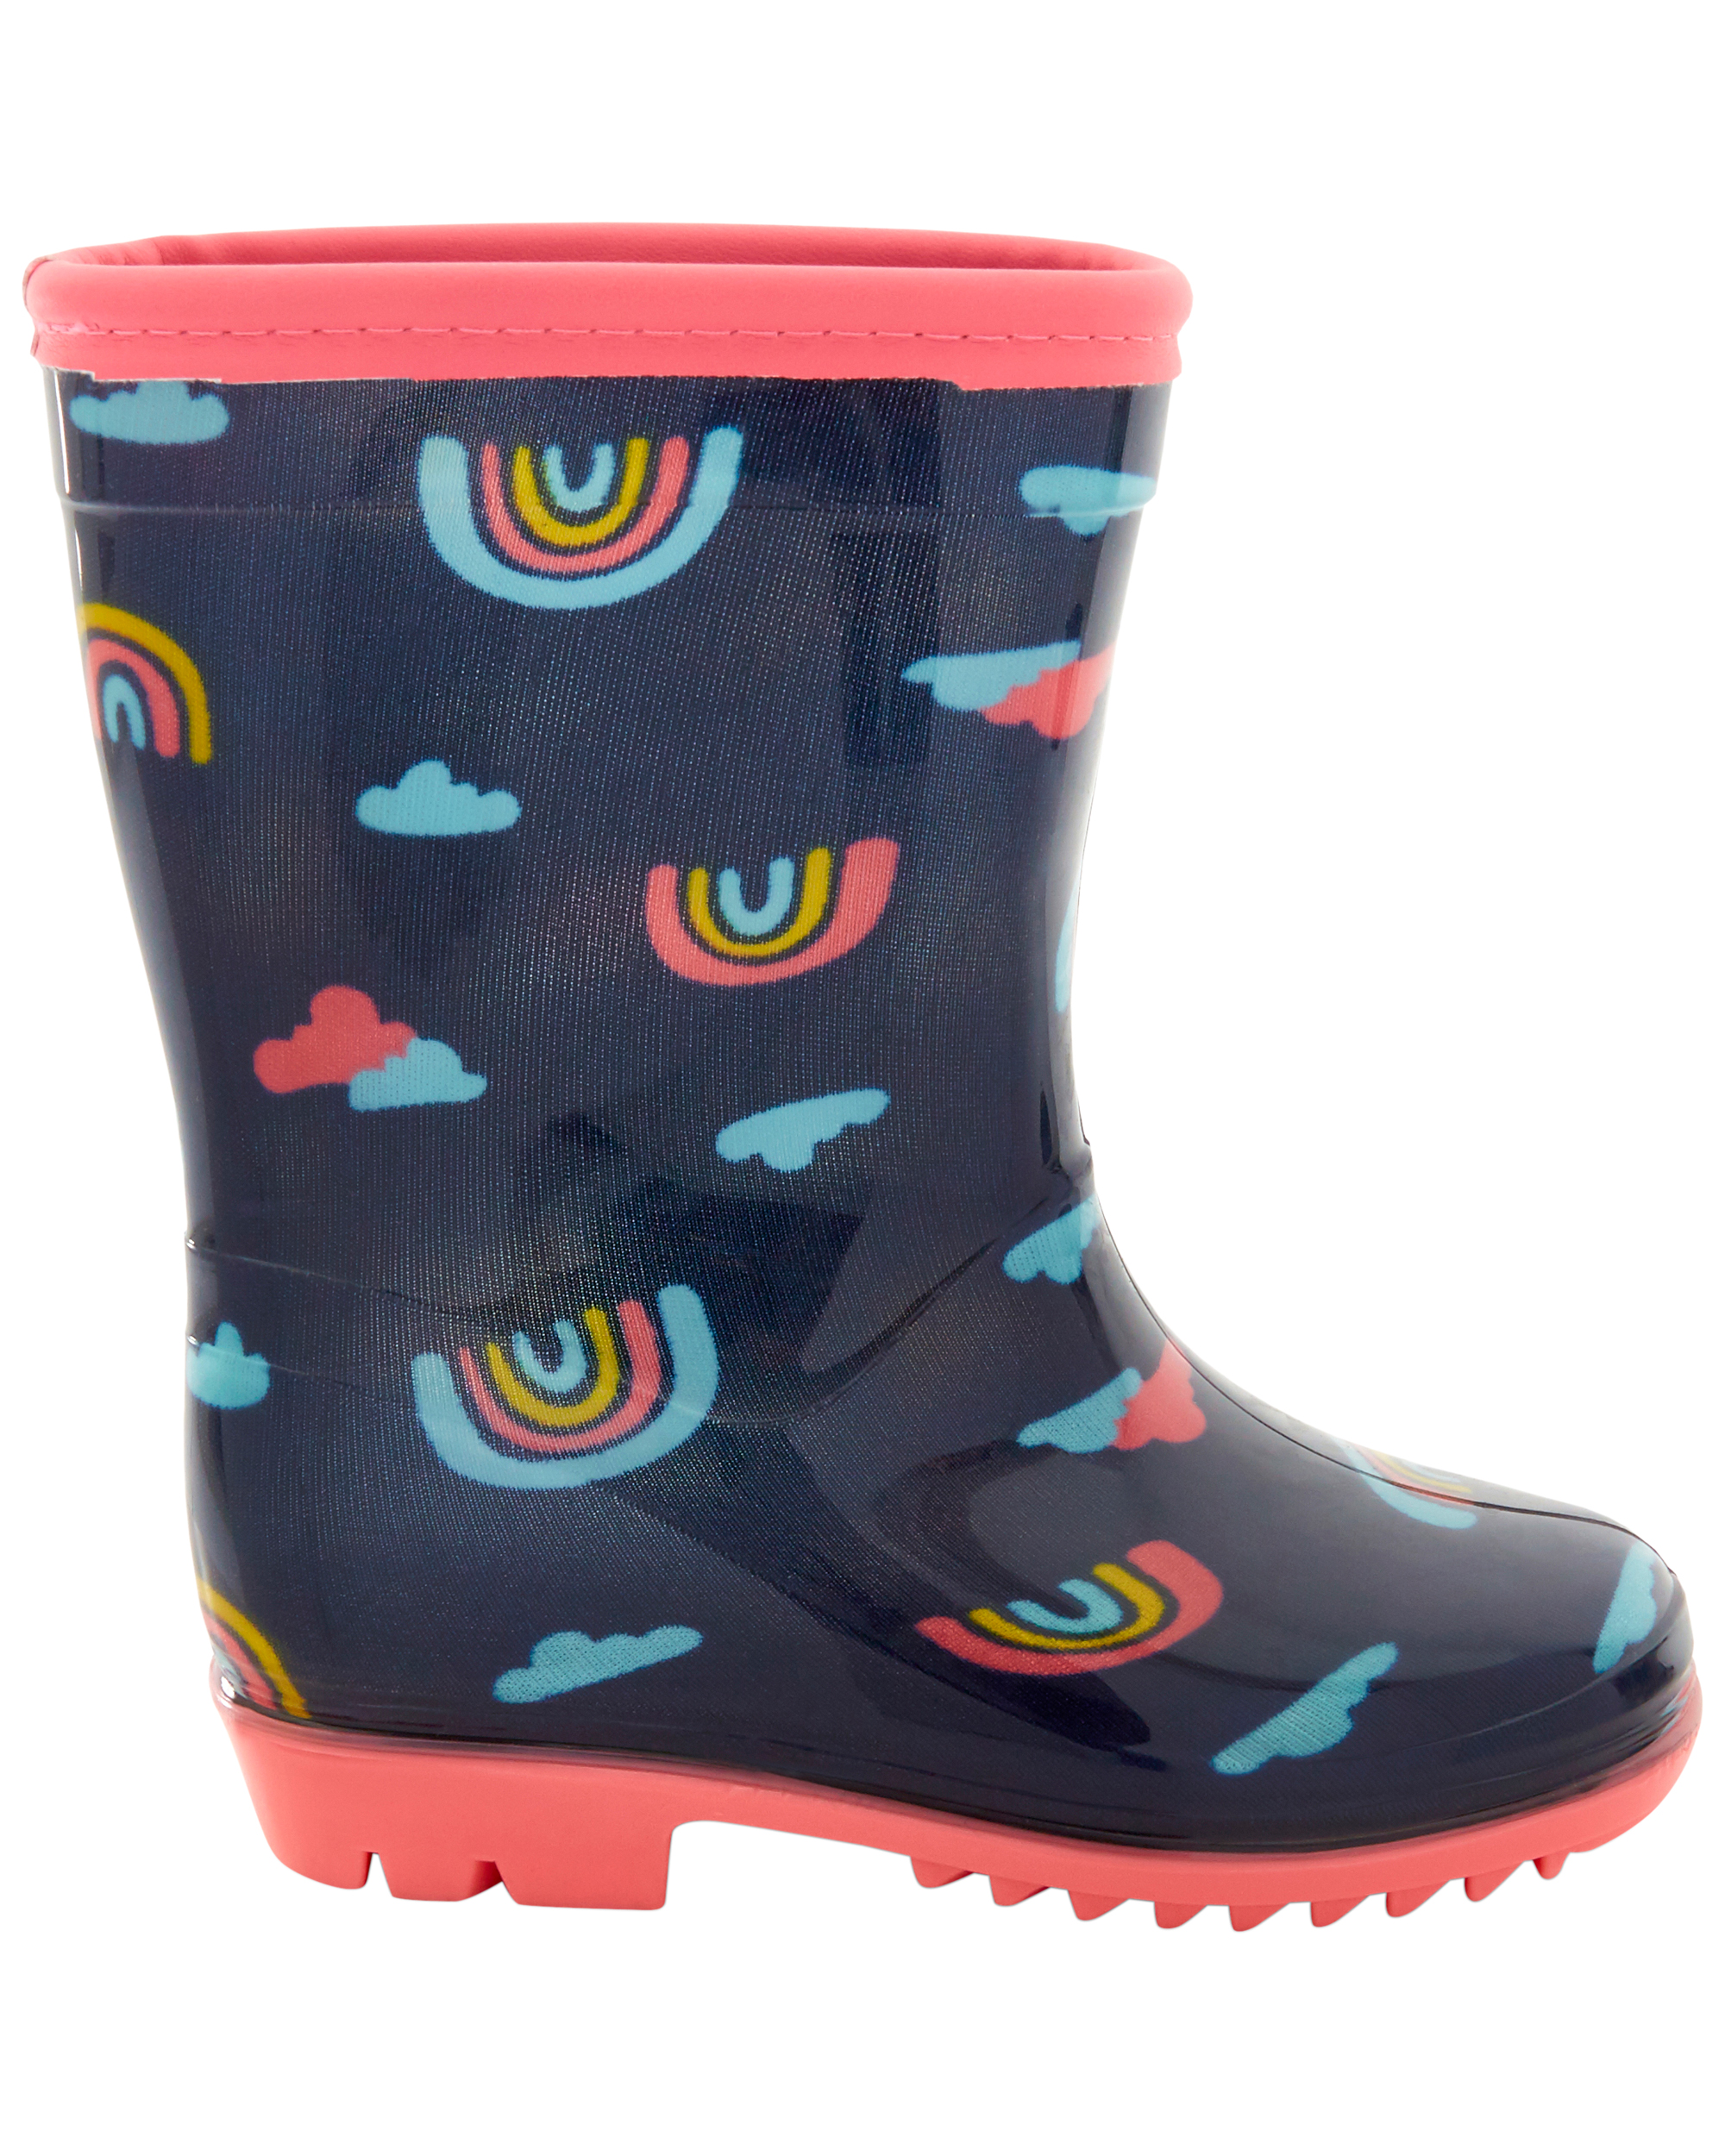 Kids' Rubber Boots